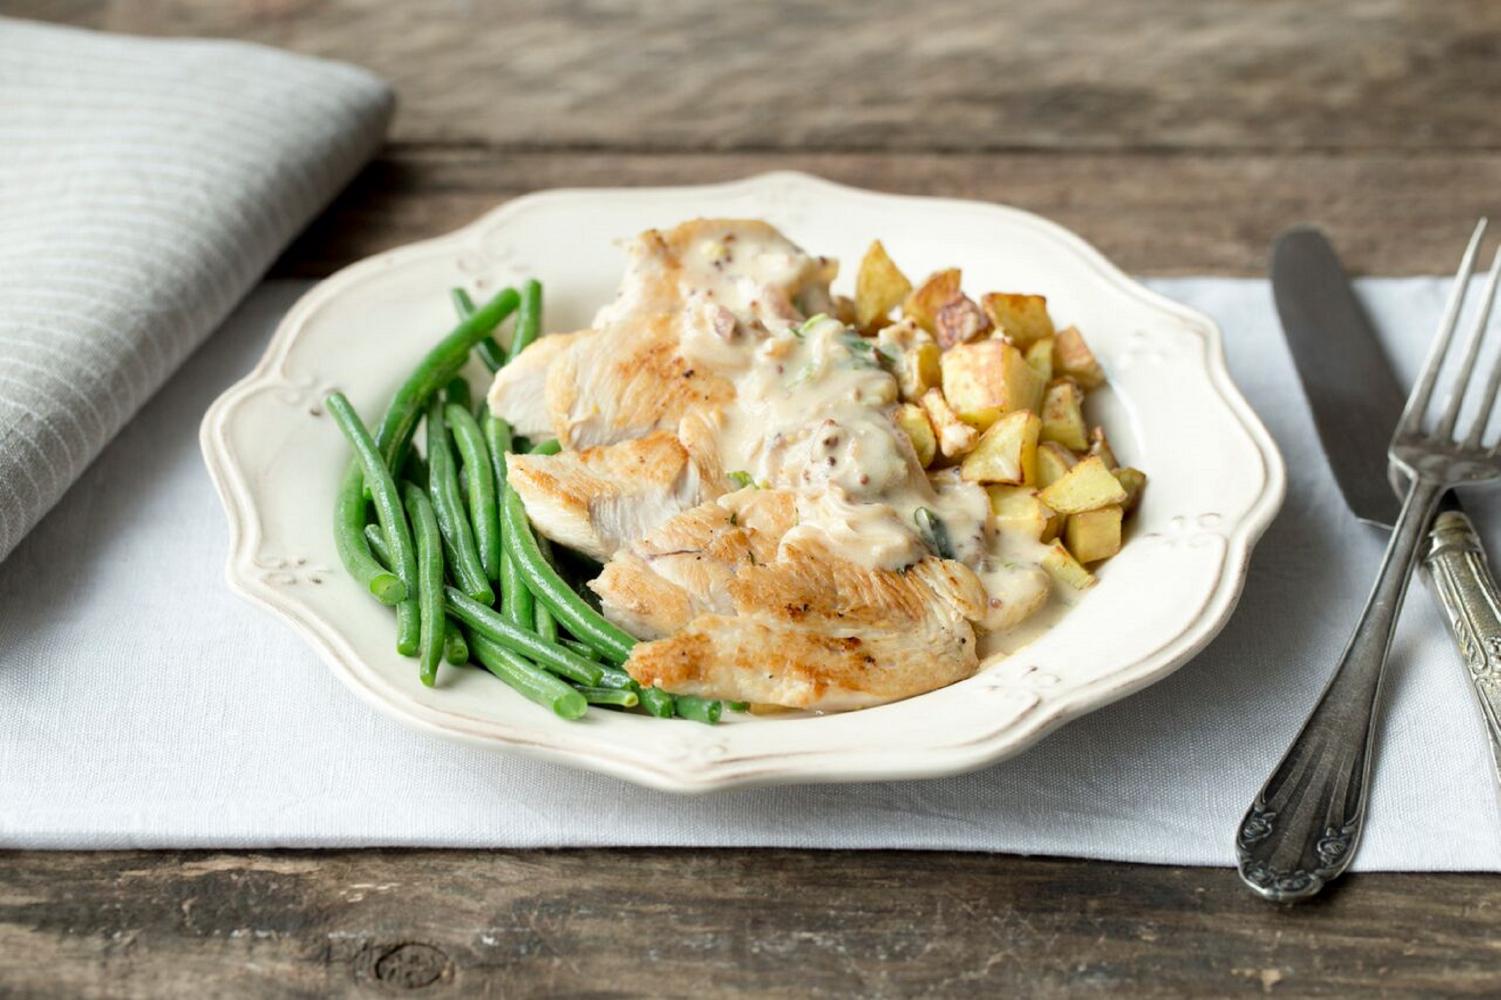 HelloFresh PAN-SEARED CHICKEN WITH ROASTED POTATOES, GREEN BEANS, AND CREAMY DILL SAUCE